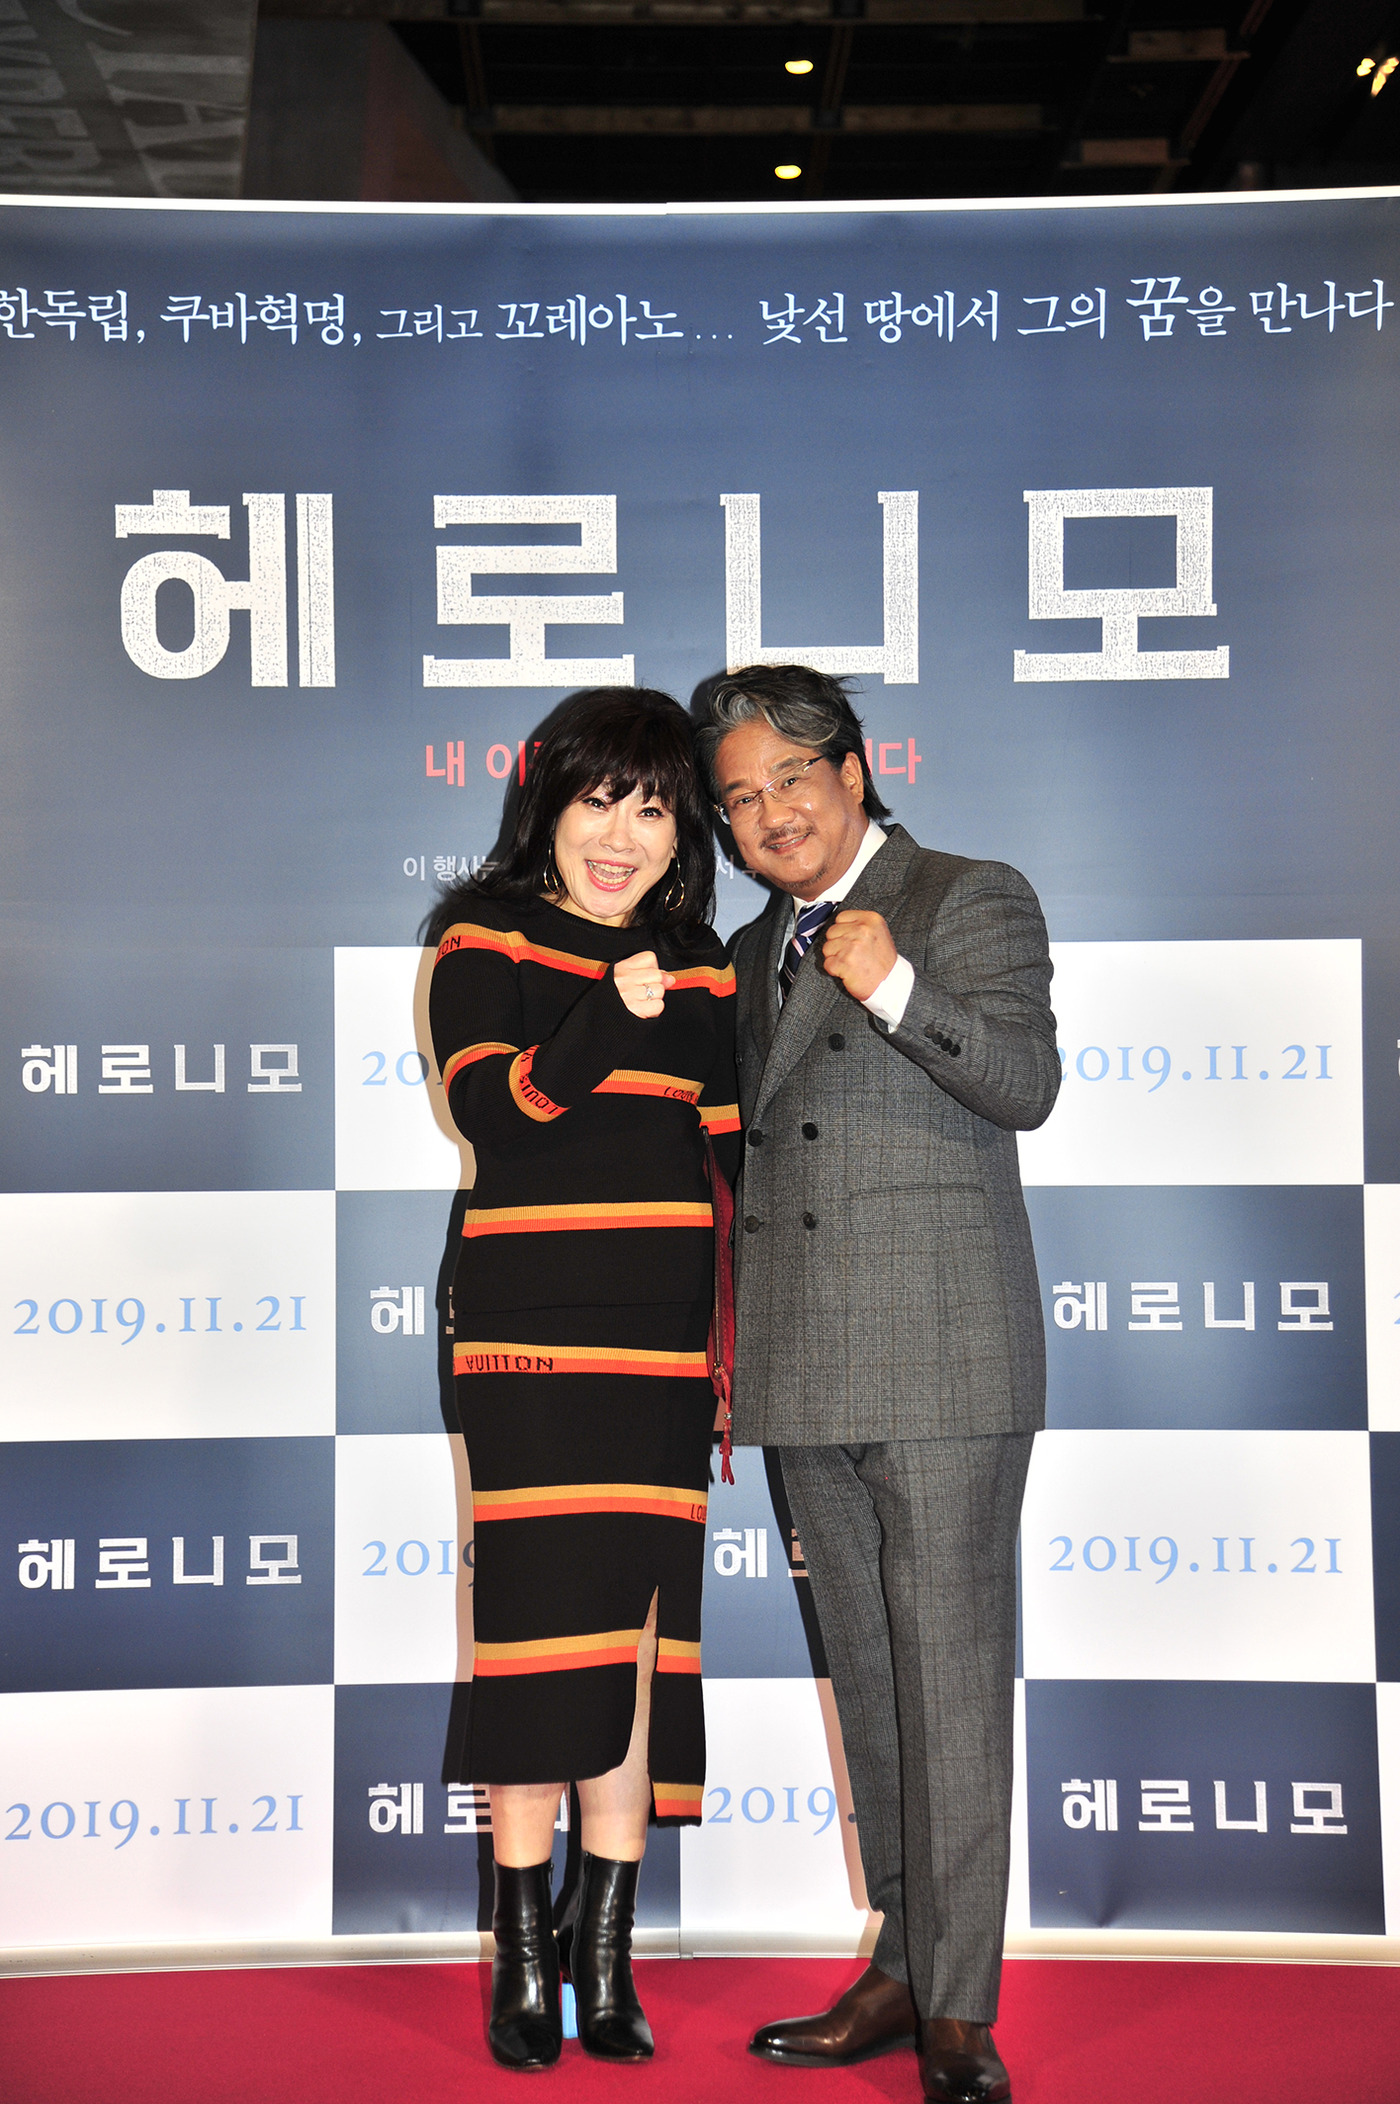 According to Connect Pictures on the 13th, VIP premiere of Heronimo held on the 12th was attended by Kang Kyung-wha, Jung Woo-sung, Noh Sa-yeon and James Moosong Lee.Heronimo is a documentary film that shares the emotions of hot country and diaspora through the random story of Korean heroinimo who participated in the Cuba revolution.The independence of Korea, the Cuba Revolution, and the identity of Correano, which has been going on for over 100 years, contains the dreams of Heronimo and Correano.Actor Jung Woo-sung, who has been steadily interested in social issues and has raised his voice, said he attended the premiere with his enthusiasm for director Jeon Seok-seok and his message Heronimo who showed his sincerity to his agency.It is a movie that asks a big question about who we should look at and communicate with the world through Korean immigration.Many Koreans were impressed by the pain that they had to leave their homeland, and the struggle and efforts to protect their country.It is a movie where everyone who lives in this age can feel many things. Singer Noh Sa-yeon, the main character of the song Meeting, which is hotly loved by overseas Koreans who are currently playing Korean and culture in Cuba and continuing their identity as a Korean, said, I did not think my song would be called out from a place far away.As a singer, it is touching and clunky: the fact that a song can bring all our hearts together is clunky, glorious, and happy.I want you to see how history has flowed and how we are here by watching this movie. He conveyed his impression of his songs and movies that resonate in his work.James Moosong Lee said, The meeting between this movie and the Korean people seems to have been a wind, not a coincidence.I hope that Heronimo will be the starting point for supporting the diaspora spread throughout the world together. The VIP premiere, sponsored by the Overseas Koreans Foundation, was attended by Chairman Guizhou of the Overseas Koreans Foundation, Superintendent Lee Jae-jung of the Gyeonggi Provincial Office of Education, and Chairman Chang Wan-ik of the Special Investigation Committee on Social Disasters.In particular, Chairman Guizhou of the Overseas Koreans Foundation, who has been involved in the production process of the film, said, There is a truth that director Jeon Seok wants to tell all of us.We will be the eyes and ears to see and hear the truth. Heronimo will be released on Monday.